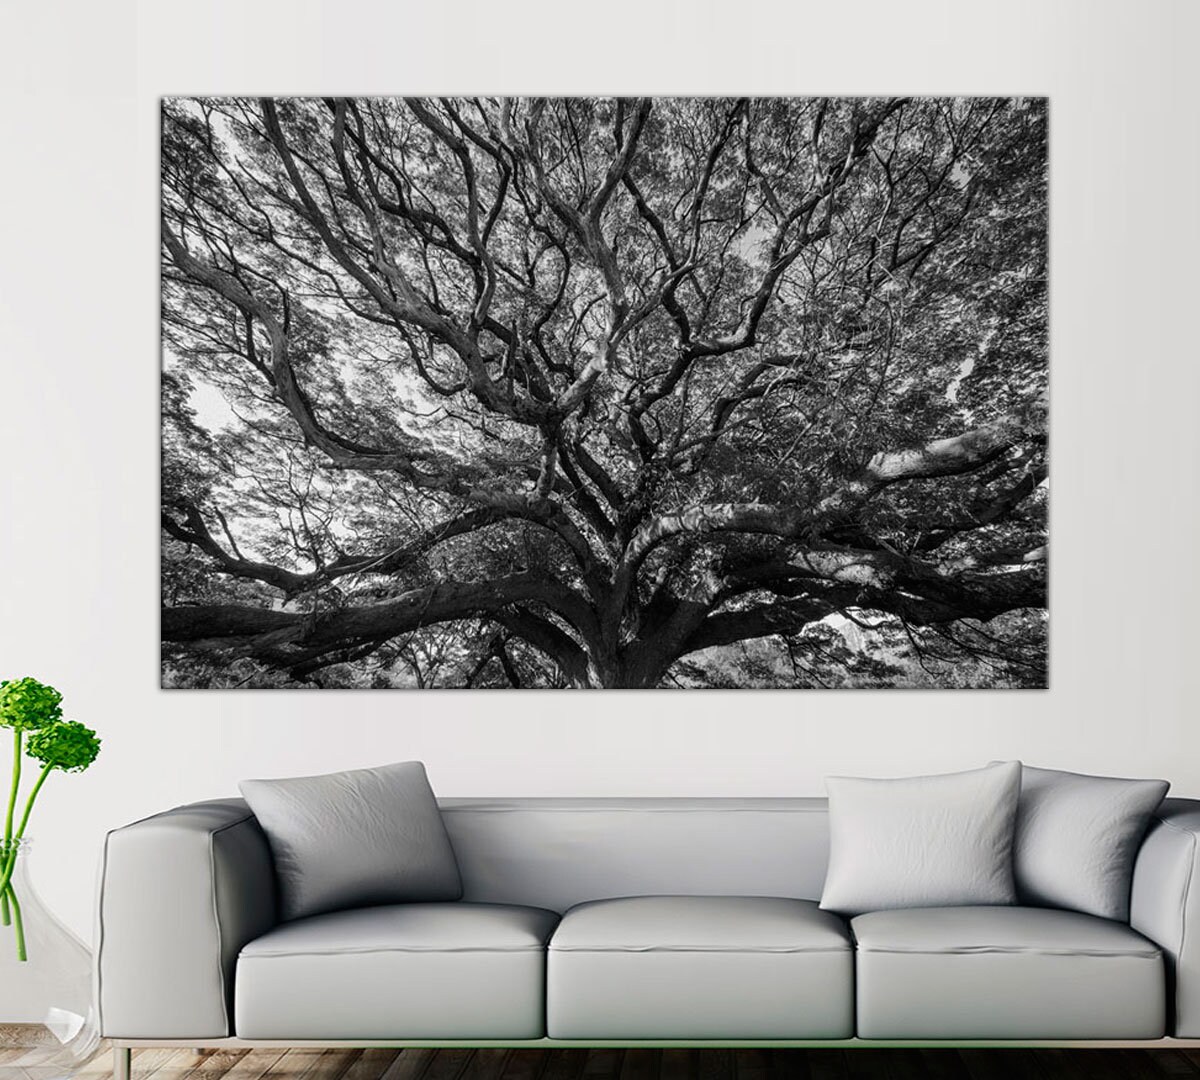 Tree Branches With Leaves Wall Art Print on Canvas Interior - Etsy